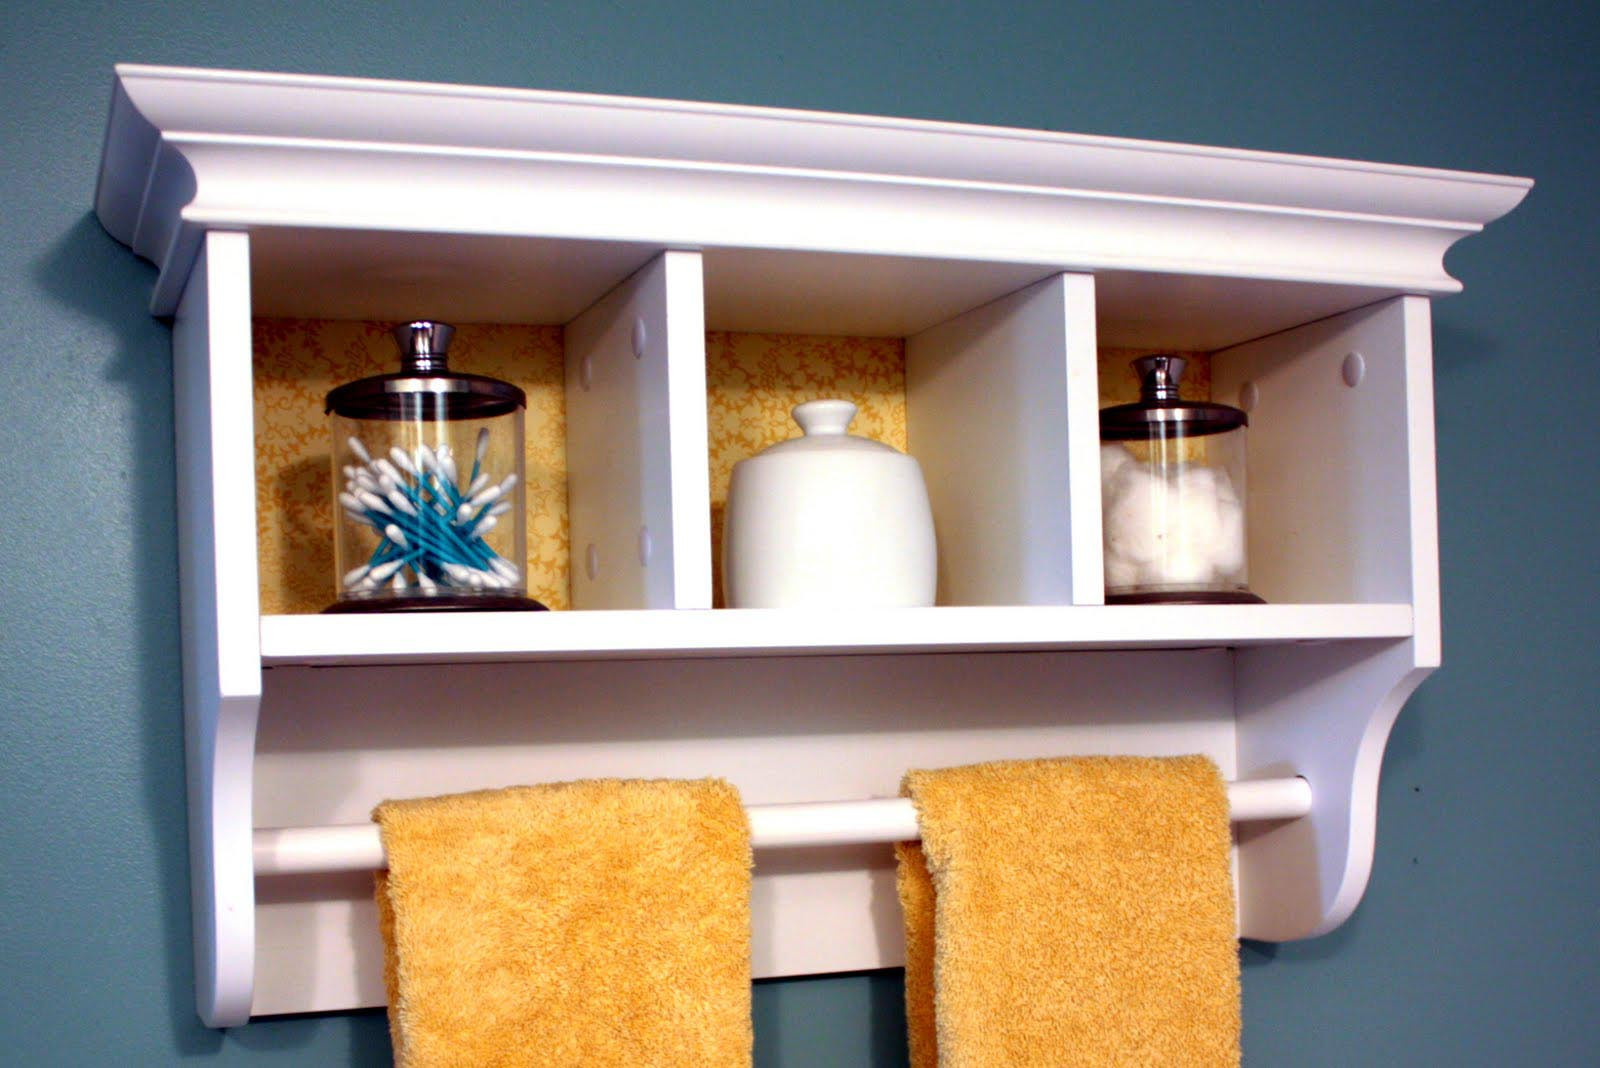 Shelves For Bathroom Wall
 Make Your Life fortable with the Small Wall Shelves